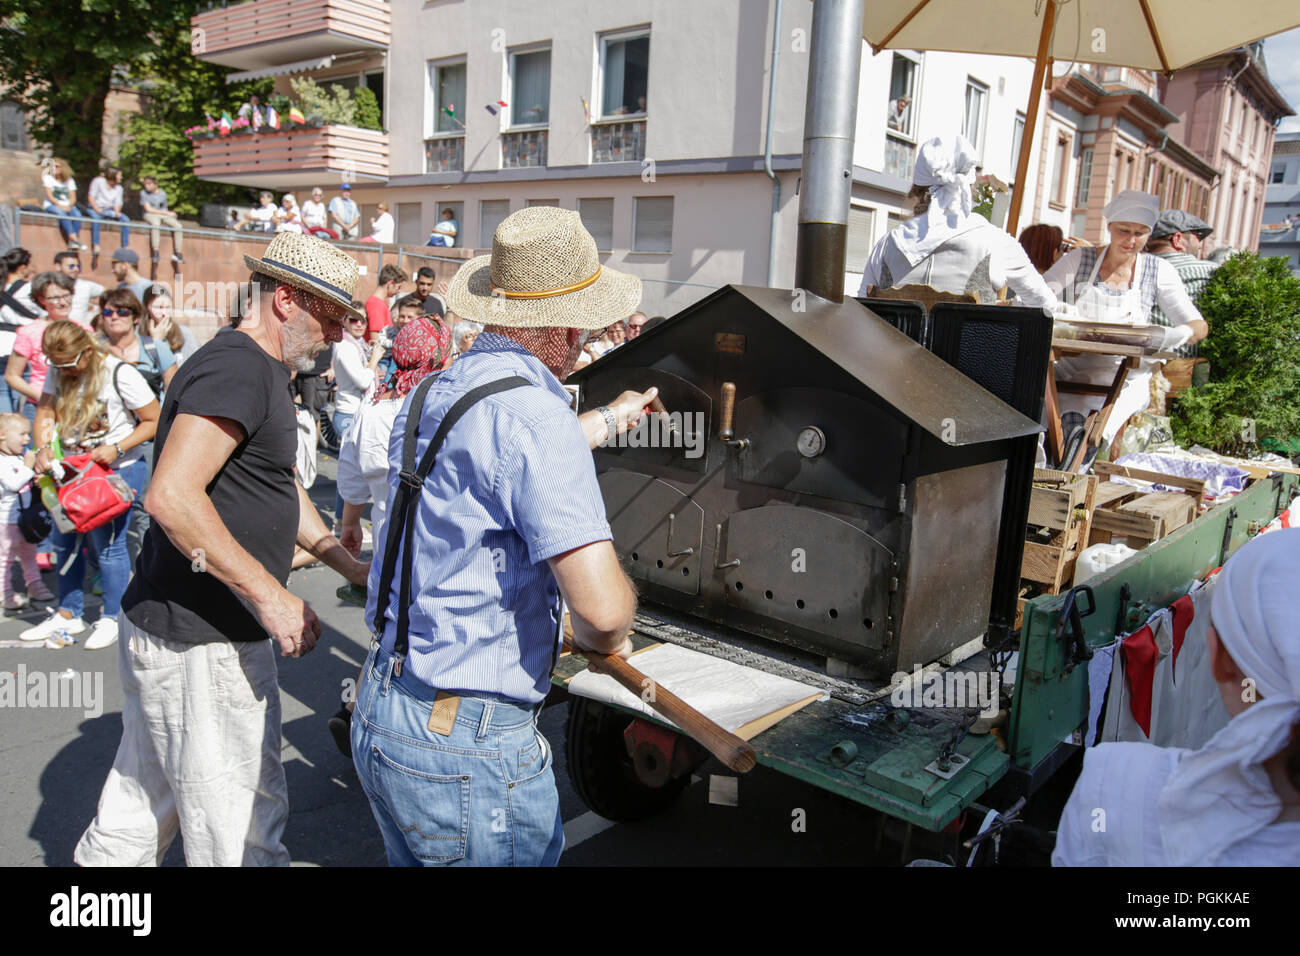 Worms, Germany. 26th Aug, 2018. Members of the Wiesoppenheim Local History Association prepare tarte flambee. The first highlight of the 2018 Backfischfest was the big parade through the city of Worms with over 70 groups and floats. Community groups, music groups and businesses from Worms and further afield took part. Credit: Michael Debets/Pacific Press/Alamy Live News Stock Photo